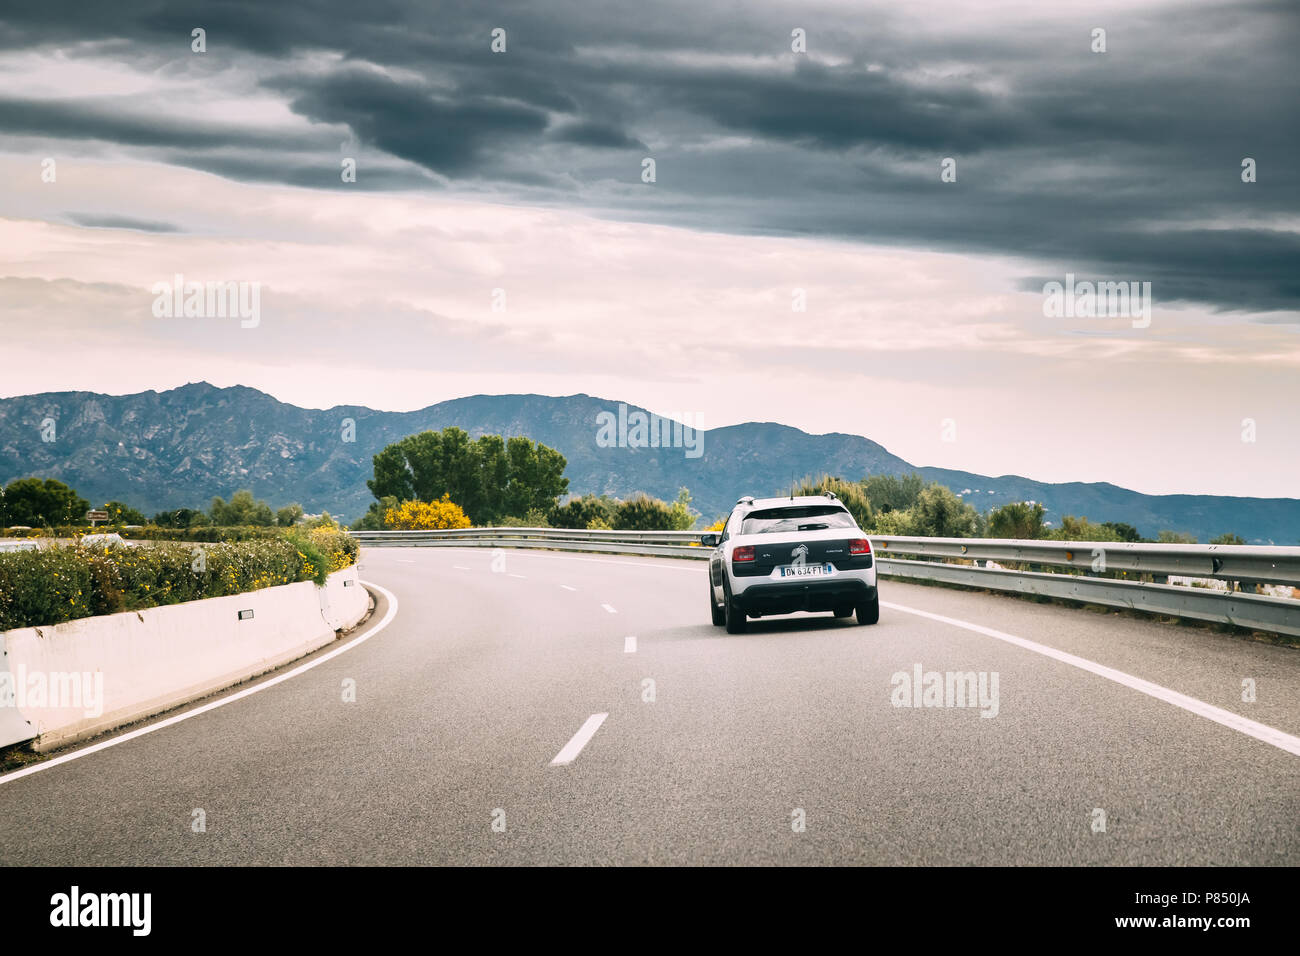 Catalonia, - May 14, 2018: Citroen Cactus Car On Highway Road Background Of Spanish Mountain Nature Landscape. C4 Cactus Is A Mini Cr Stock Photo - Alamy